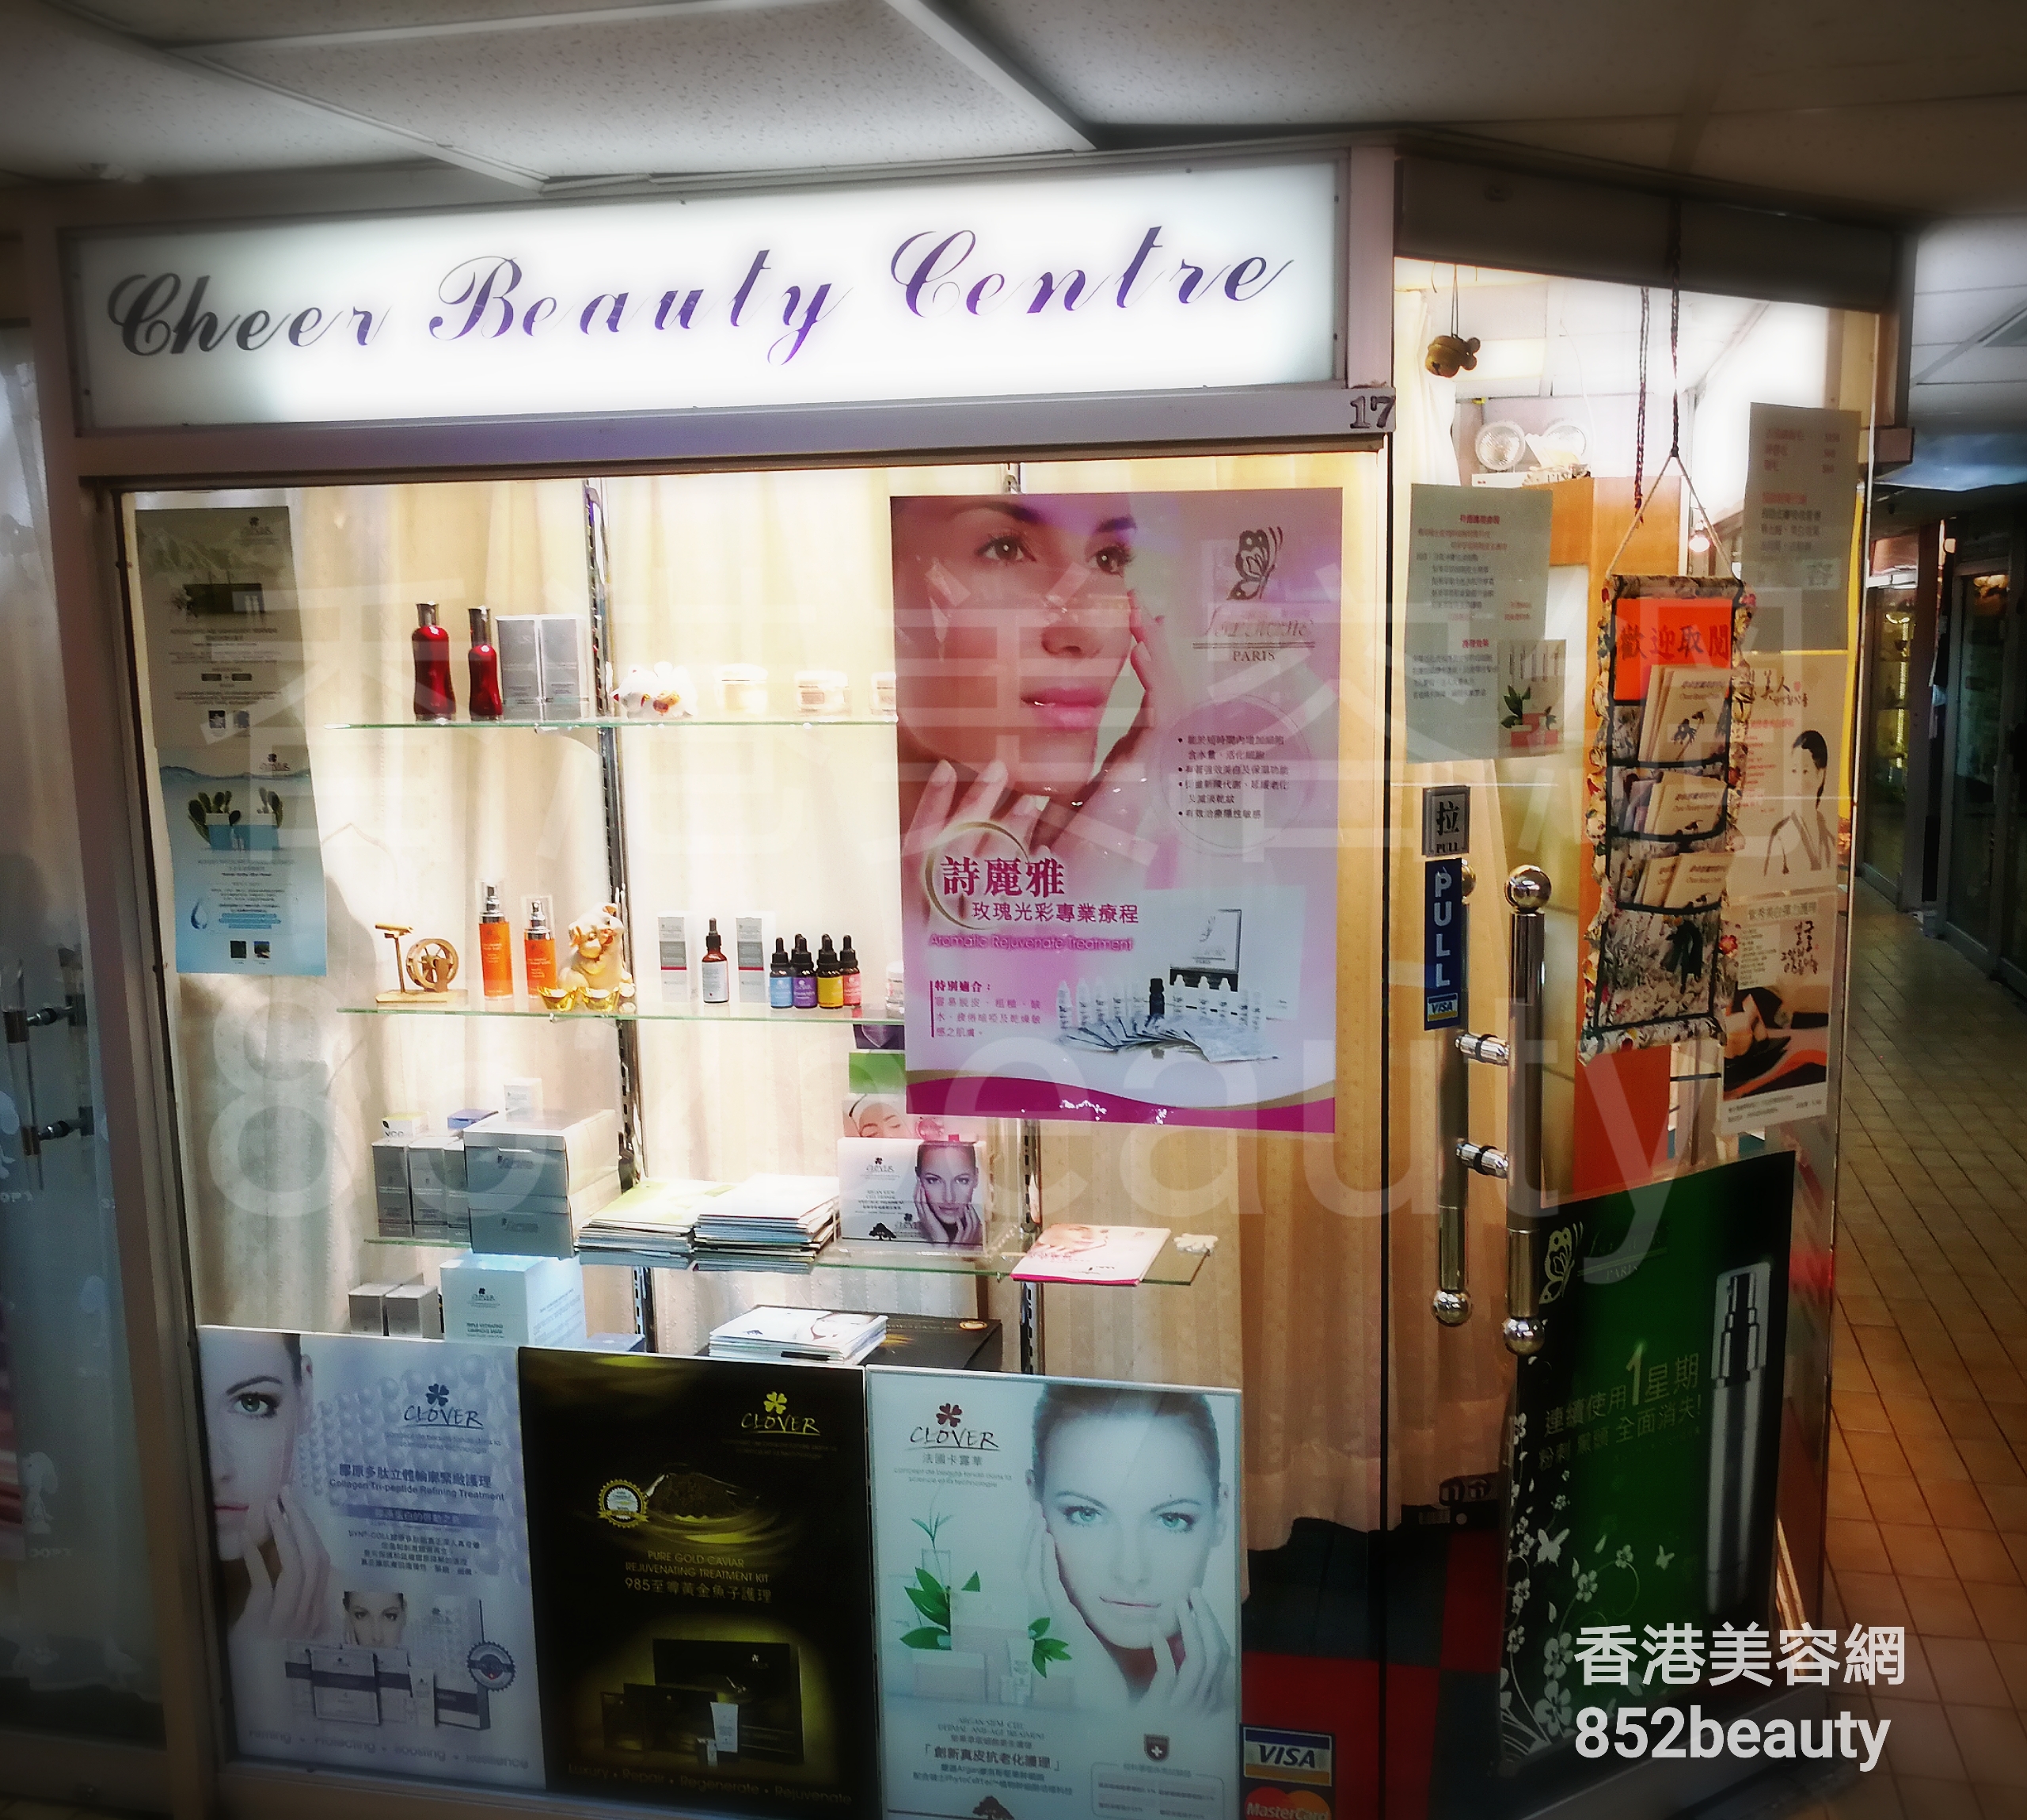 Hair Removal: Cheer Beauty Centre